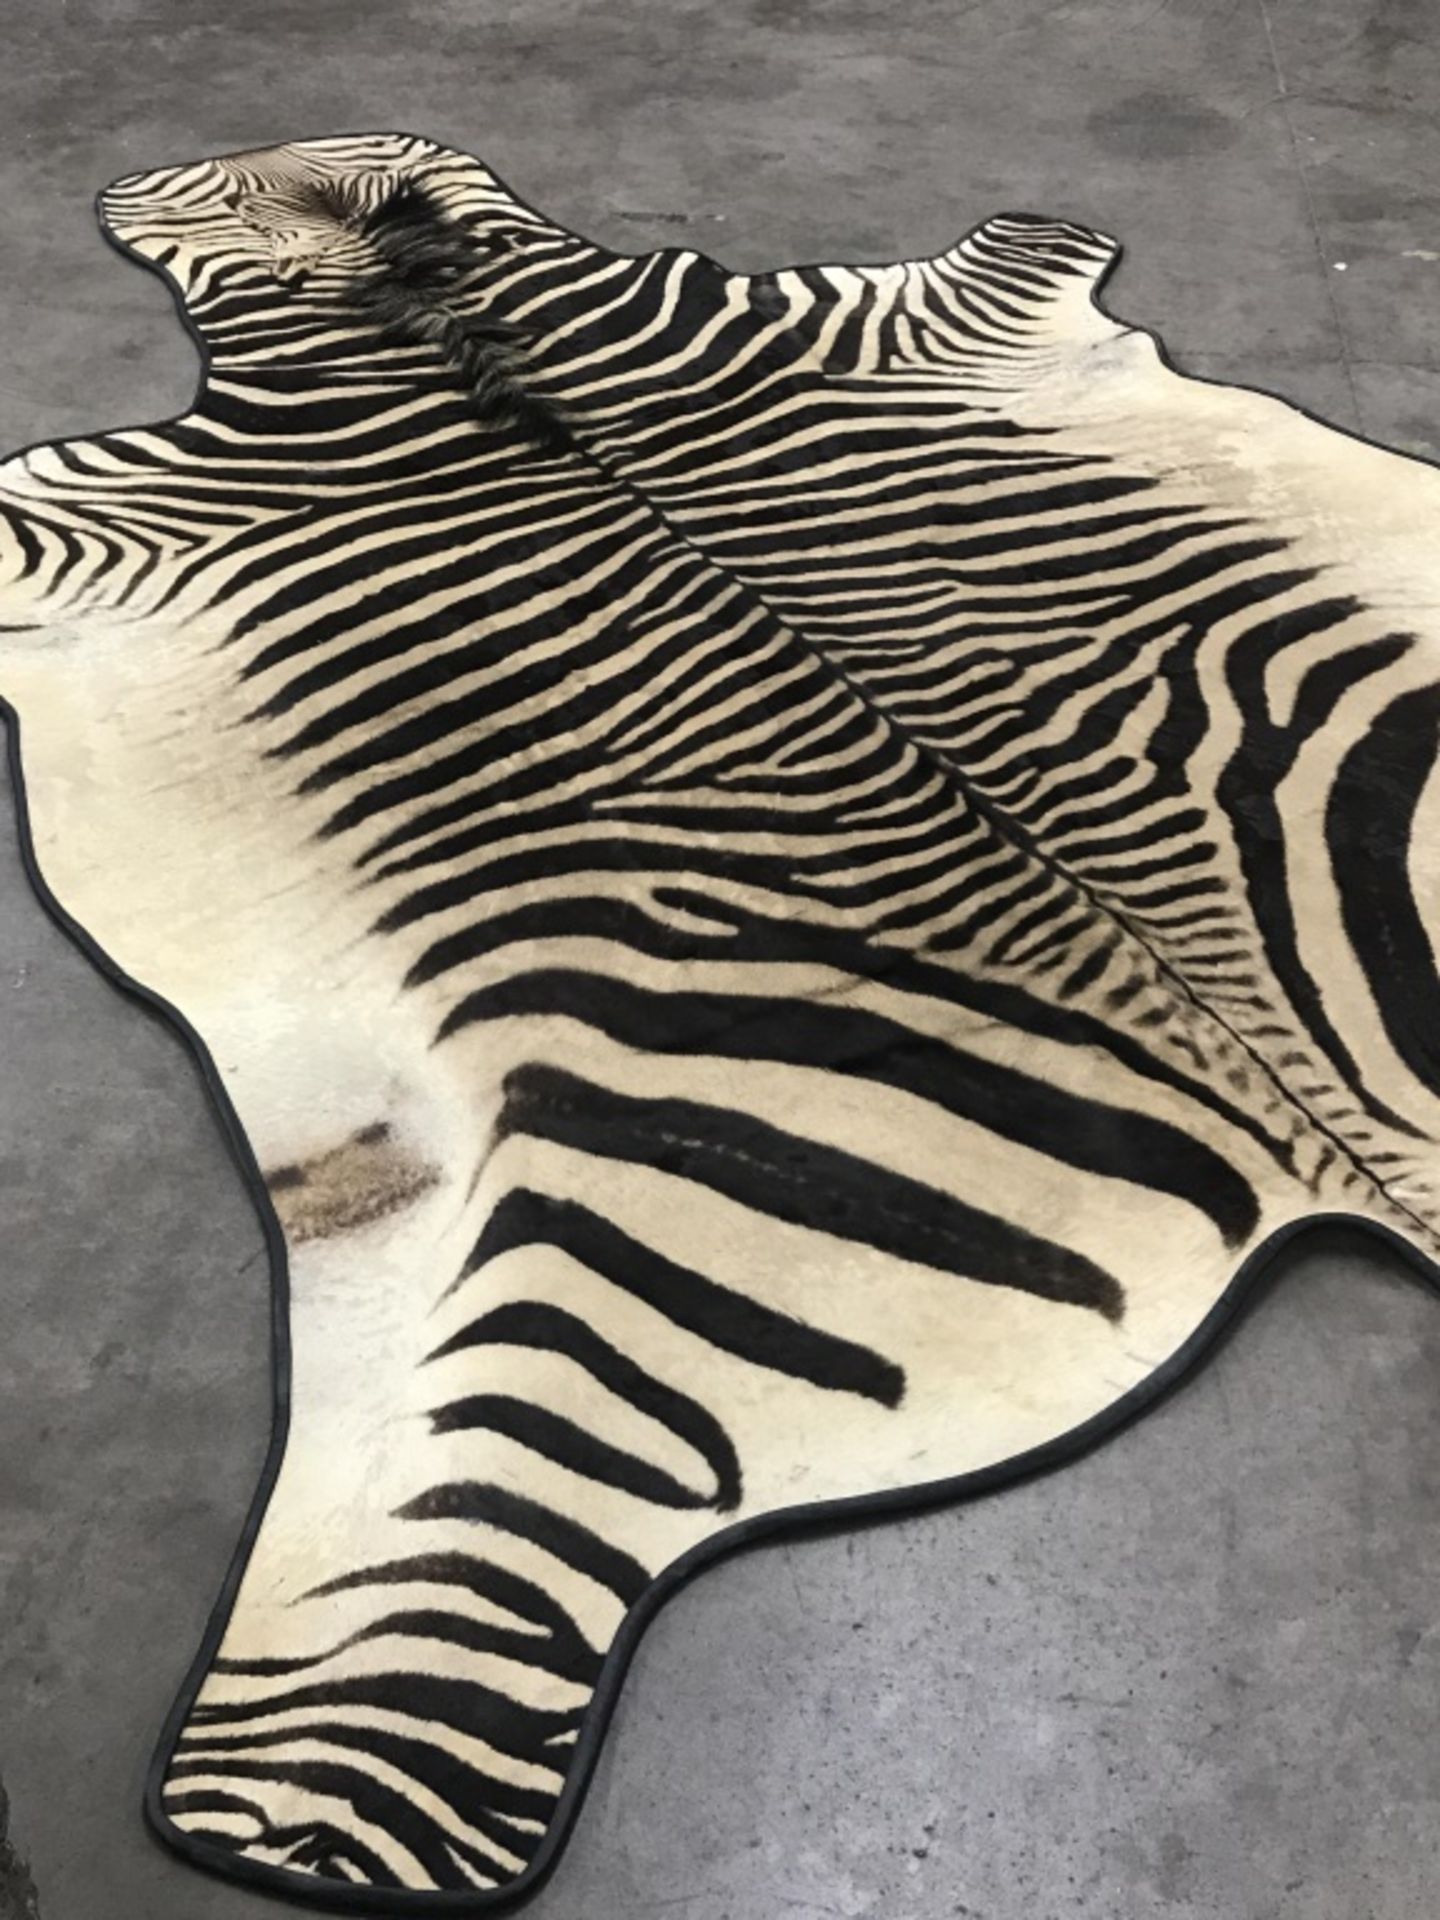 Very Nice Zebra Rug (TX Res. Only) - Image 12 of 13